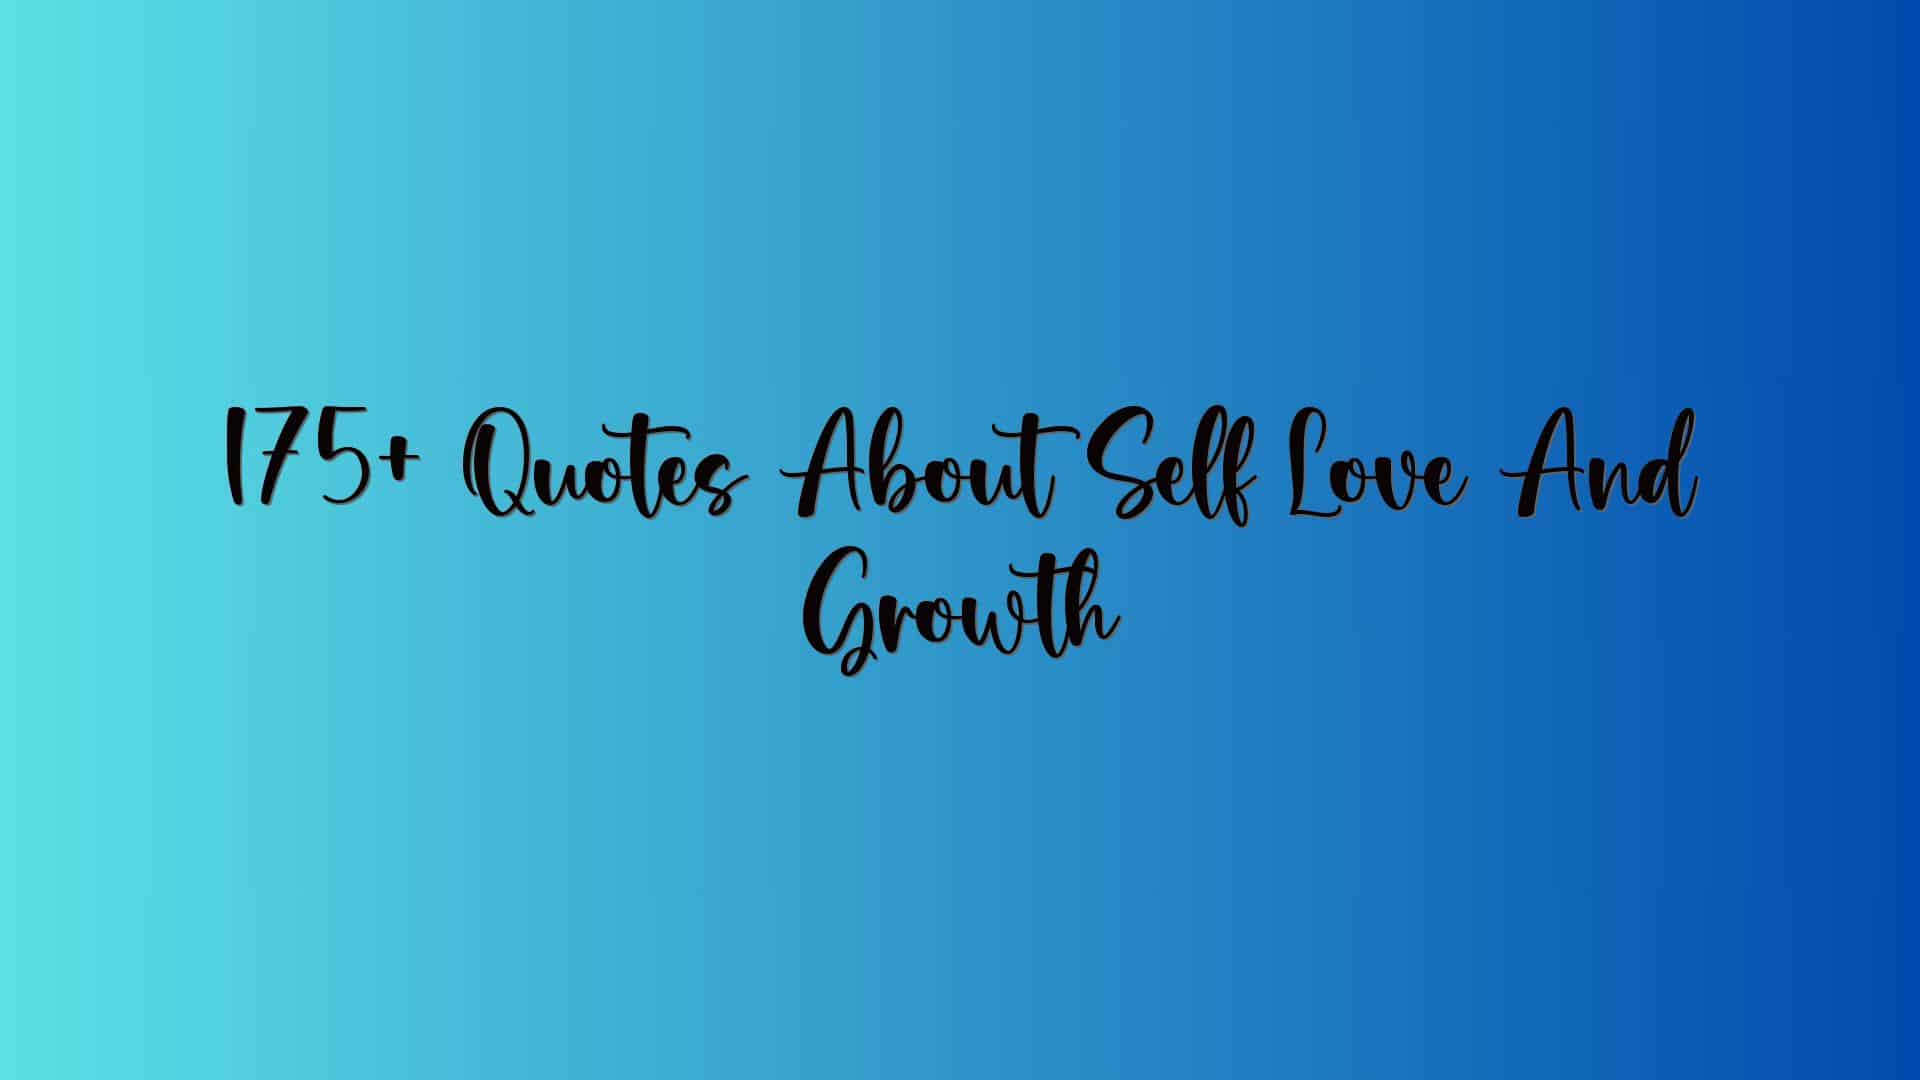 175+ Quotes About Self Love And Growth